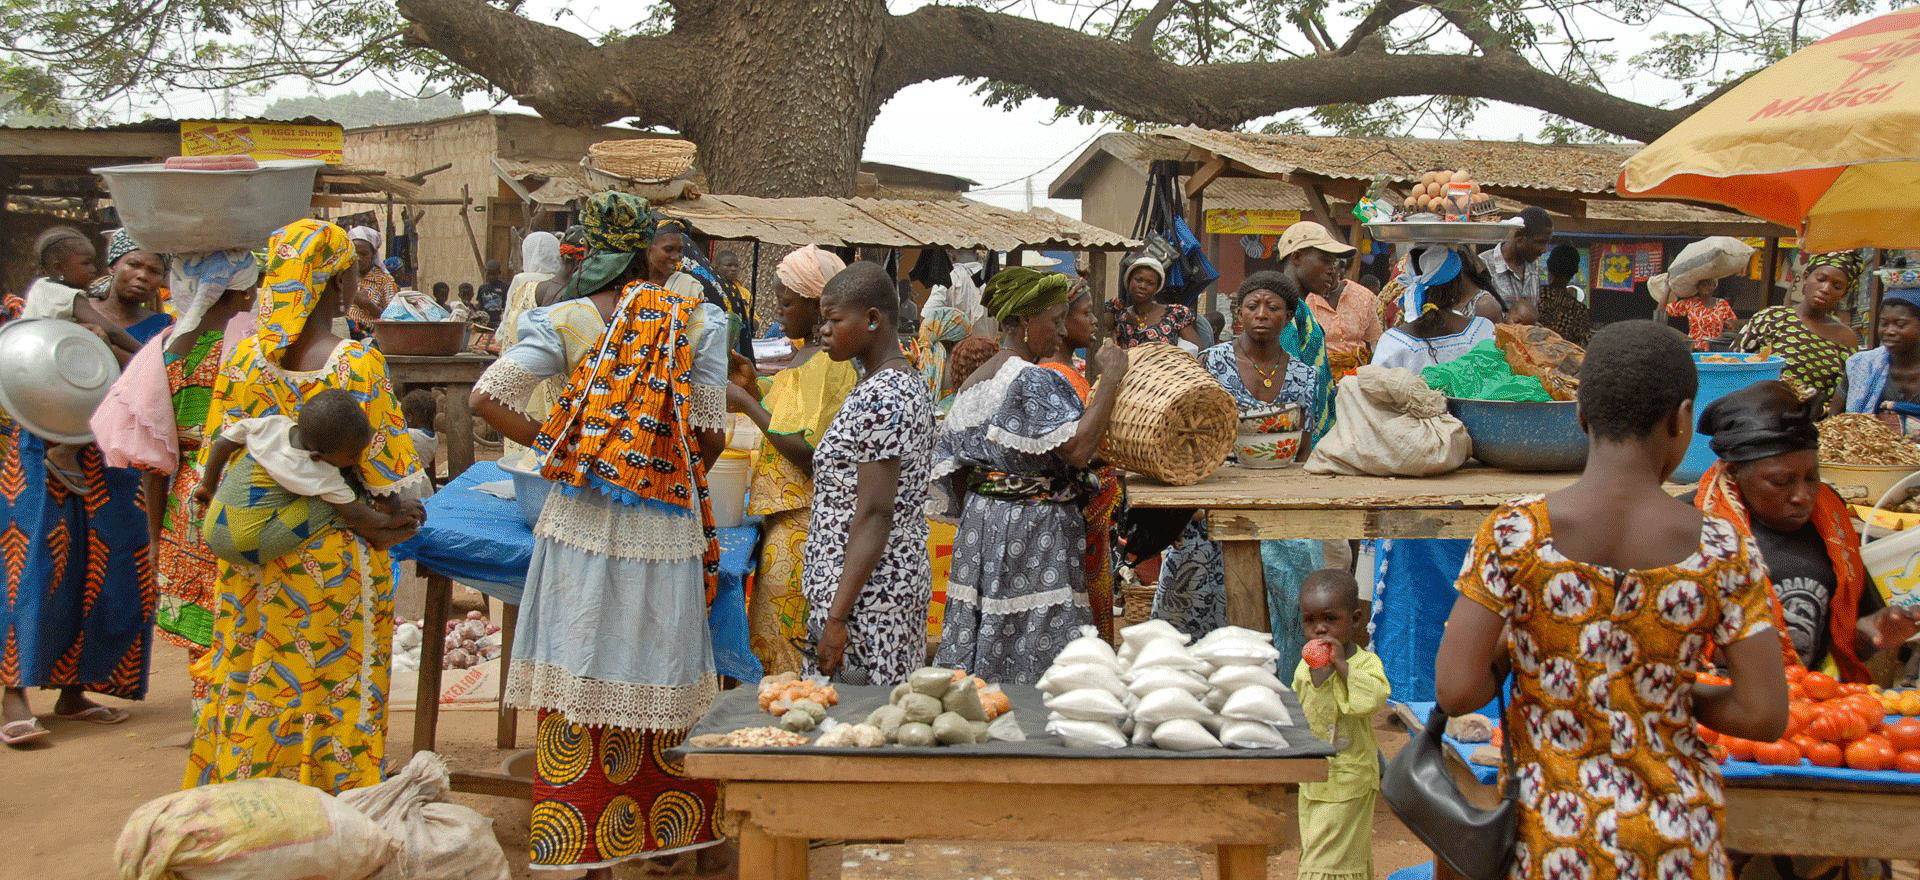 Guinea Holidays and Tours - Traditional market scene